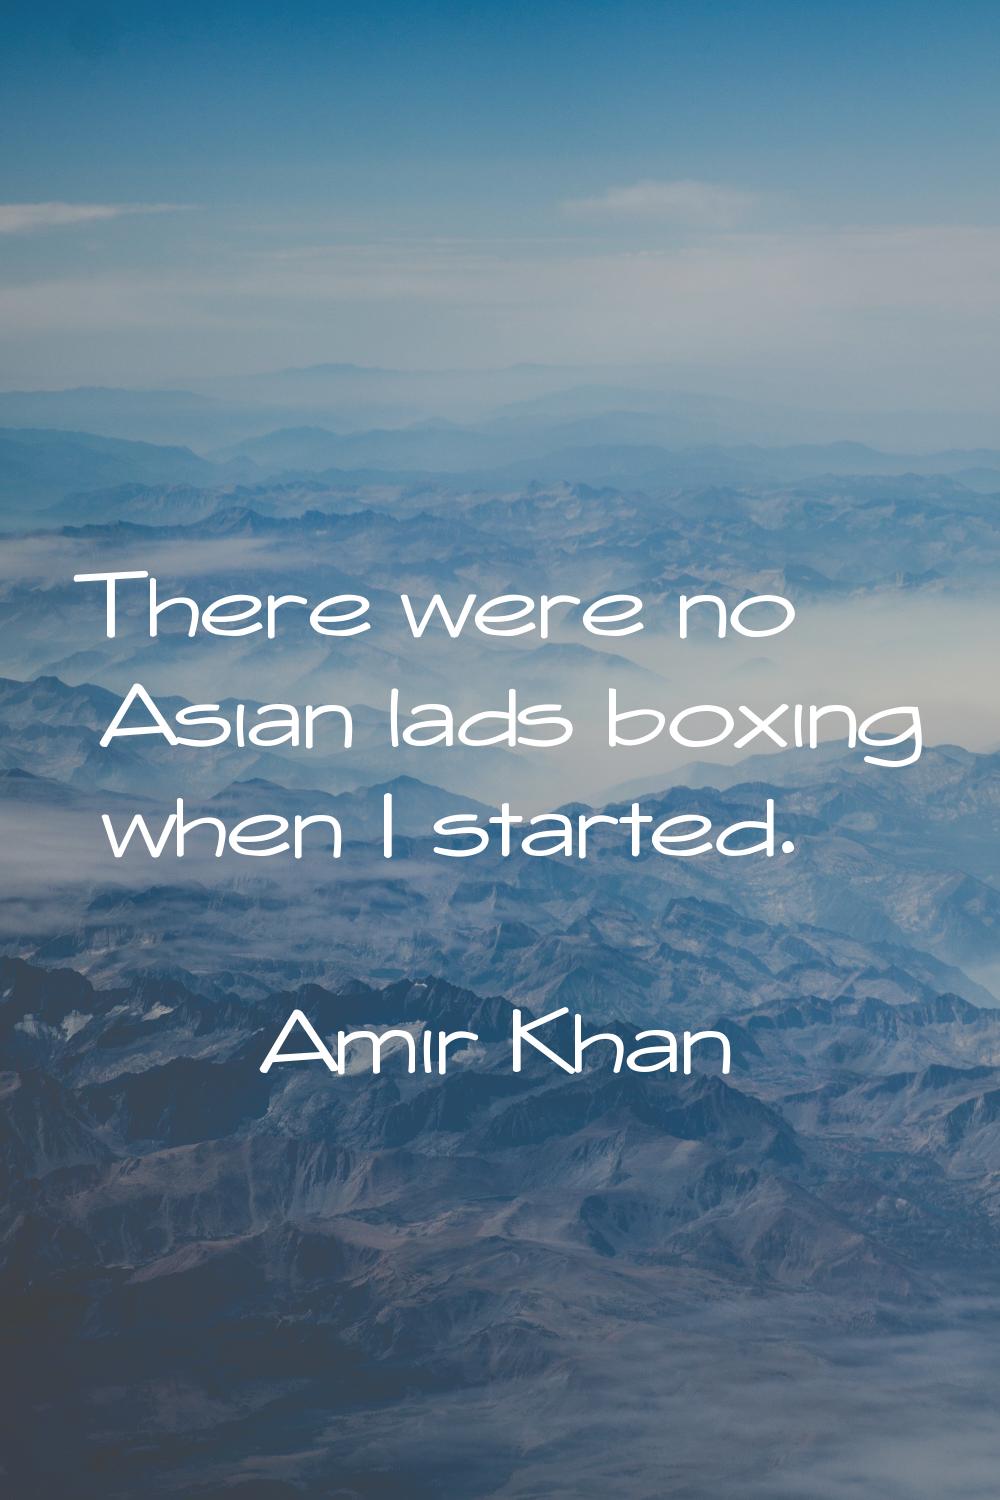 There were no Asian lads boxing when I started.